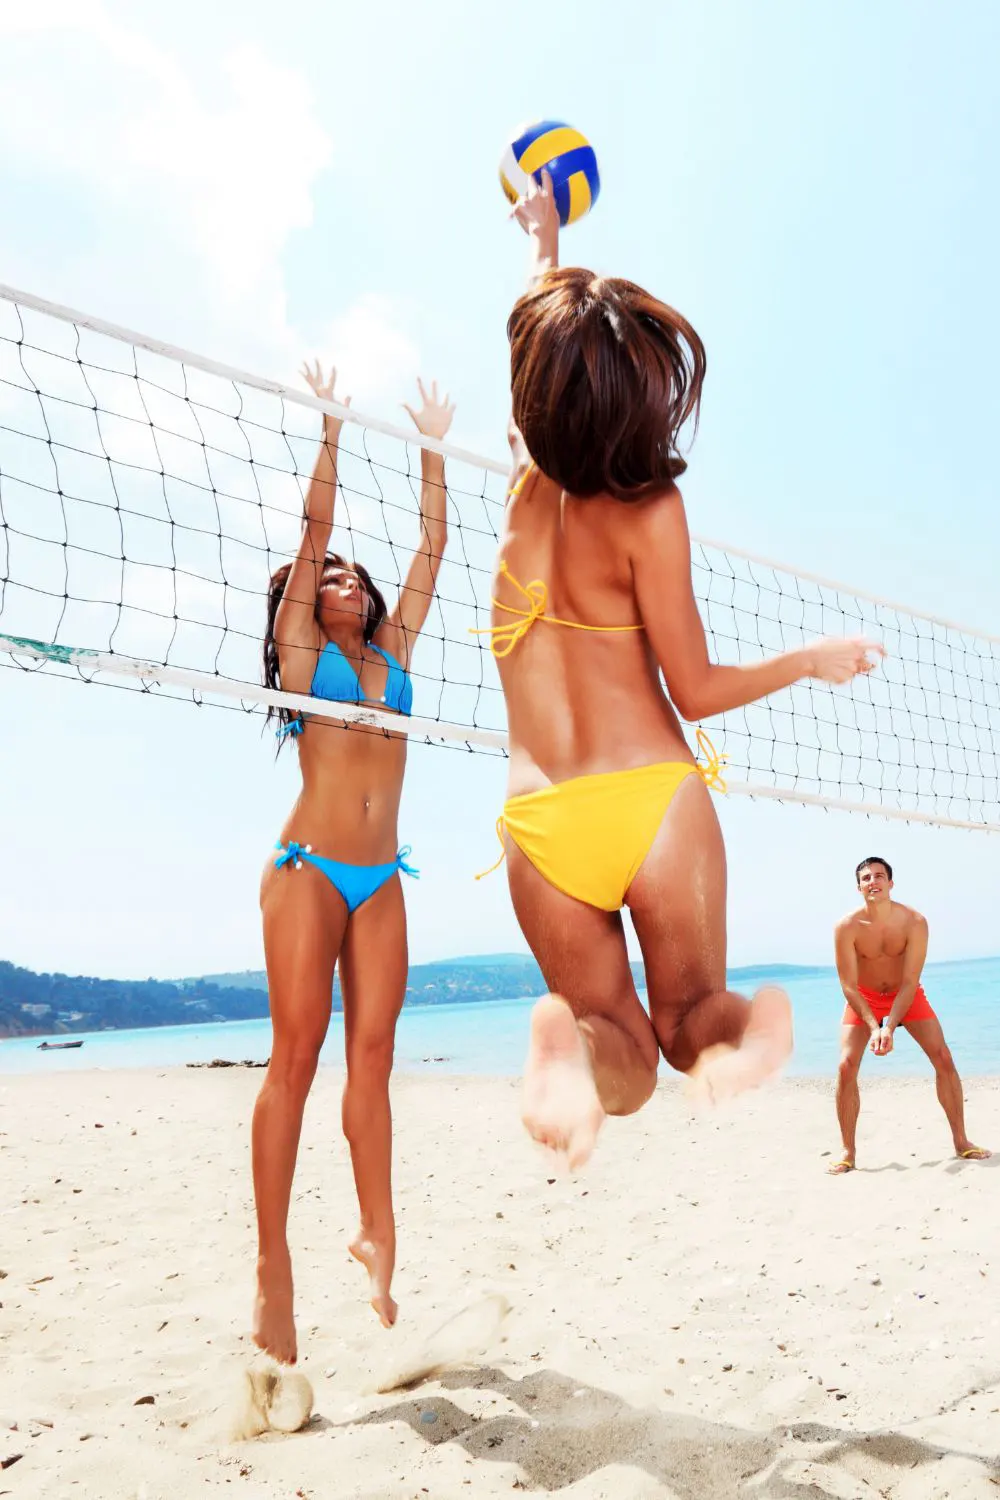 Female beach volleyball players